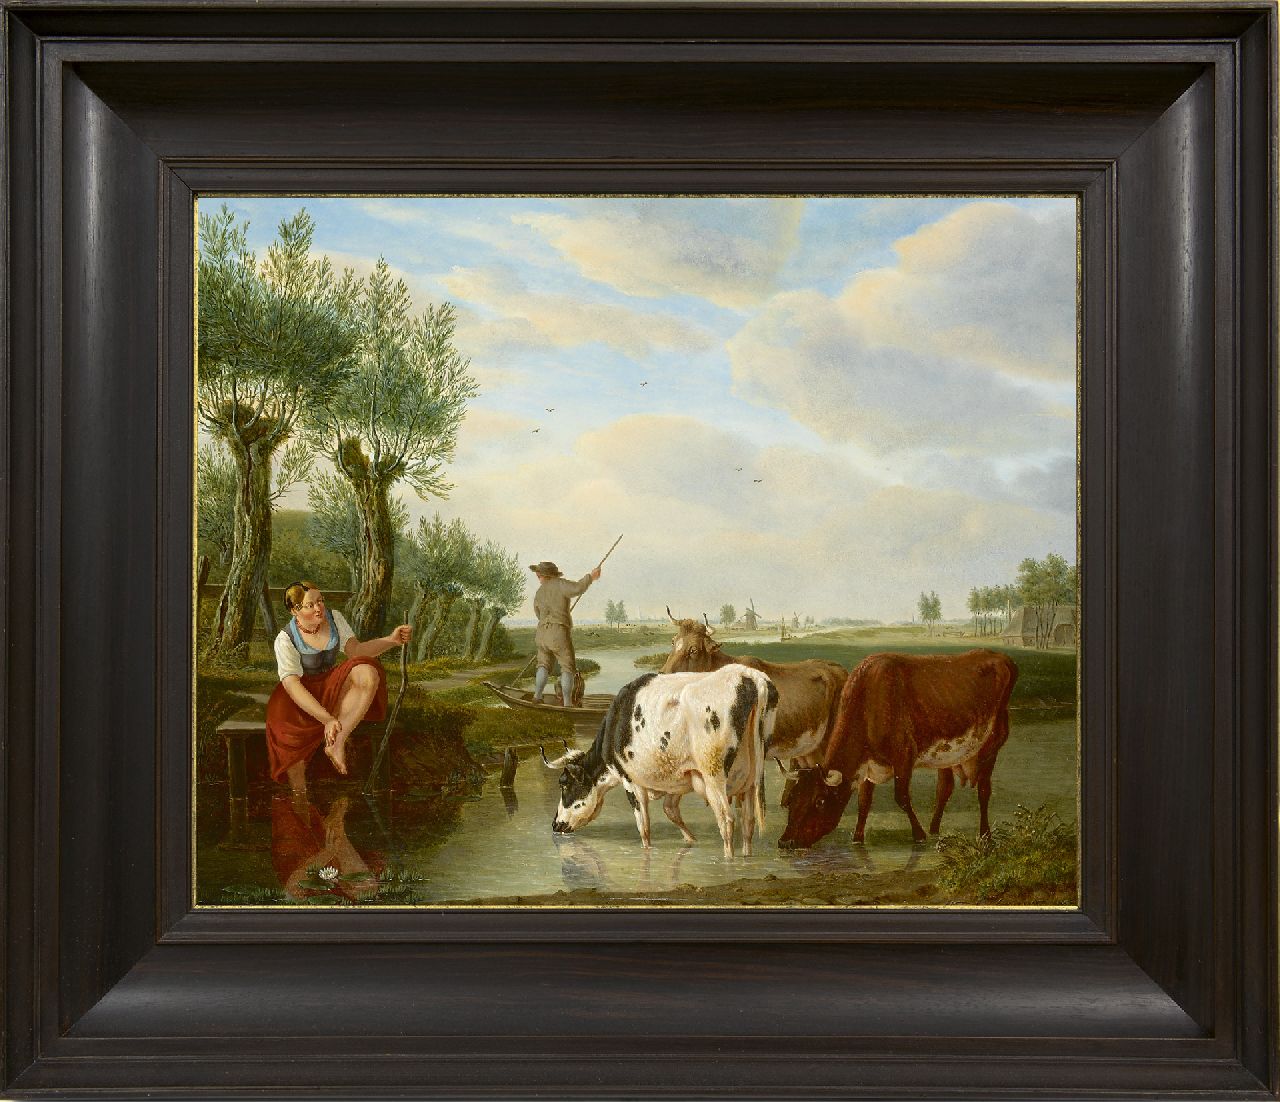 Kuytenbrouwer M.A.  | Martinus Antonius Kuytenbrouwer | Paintings offered for sale | A ferryman and cowherd in a Dutch river landscape, oil on panel 38.8 x 47.3 cm, signed l.r.